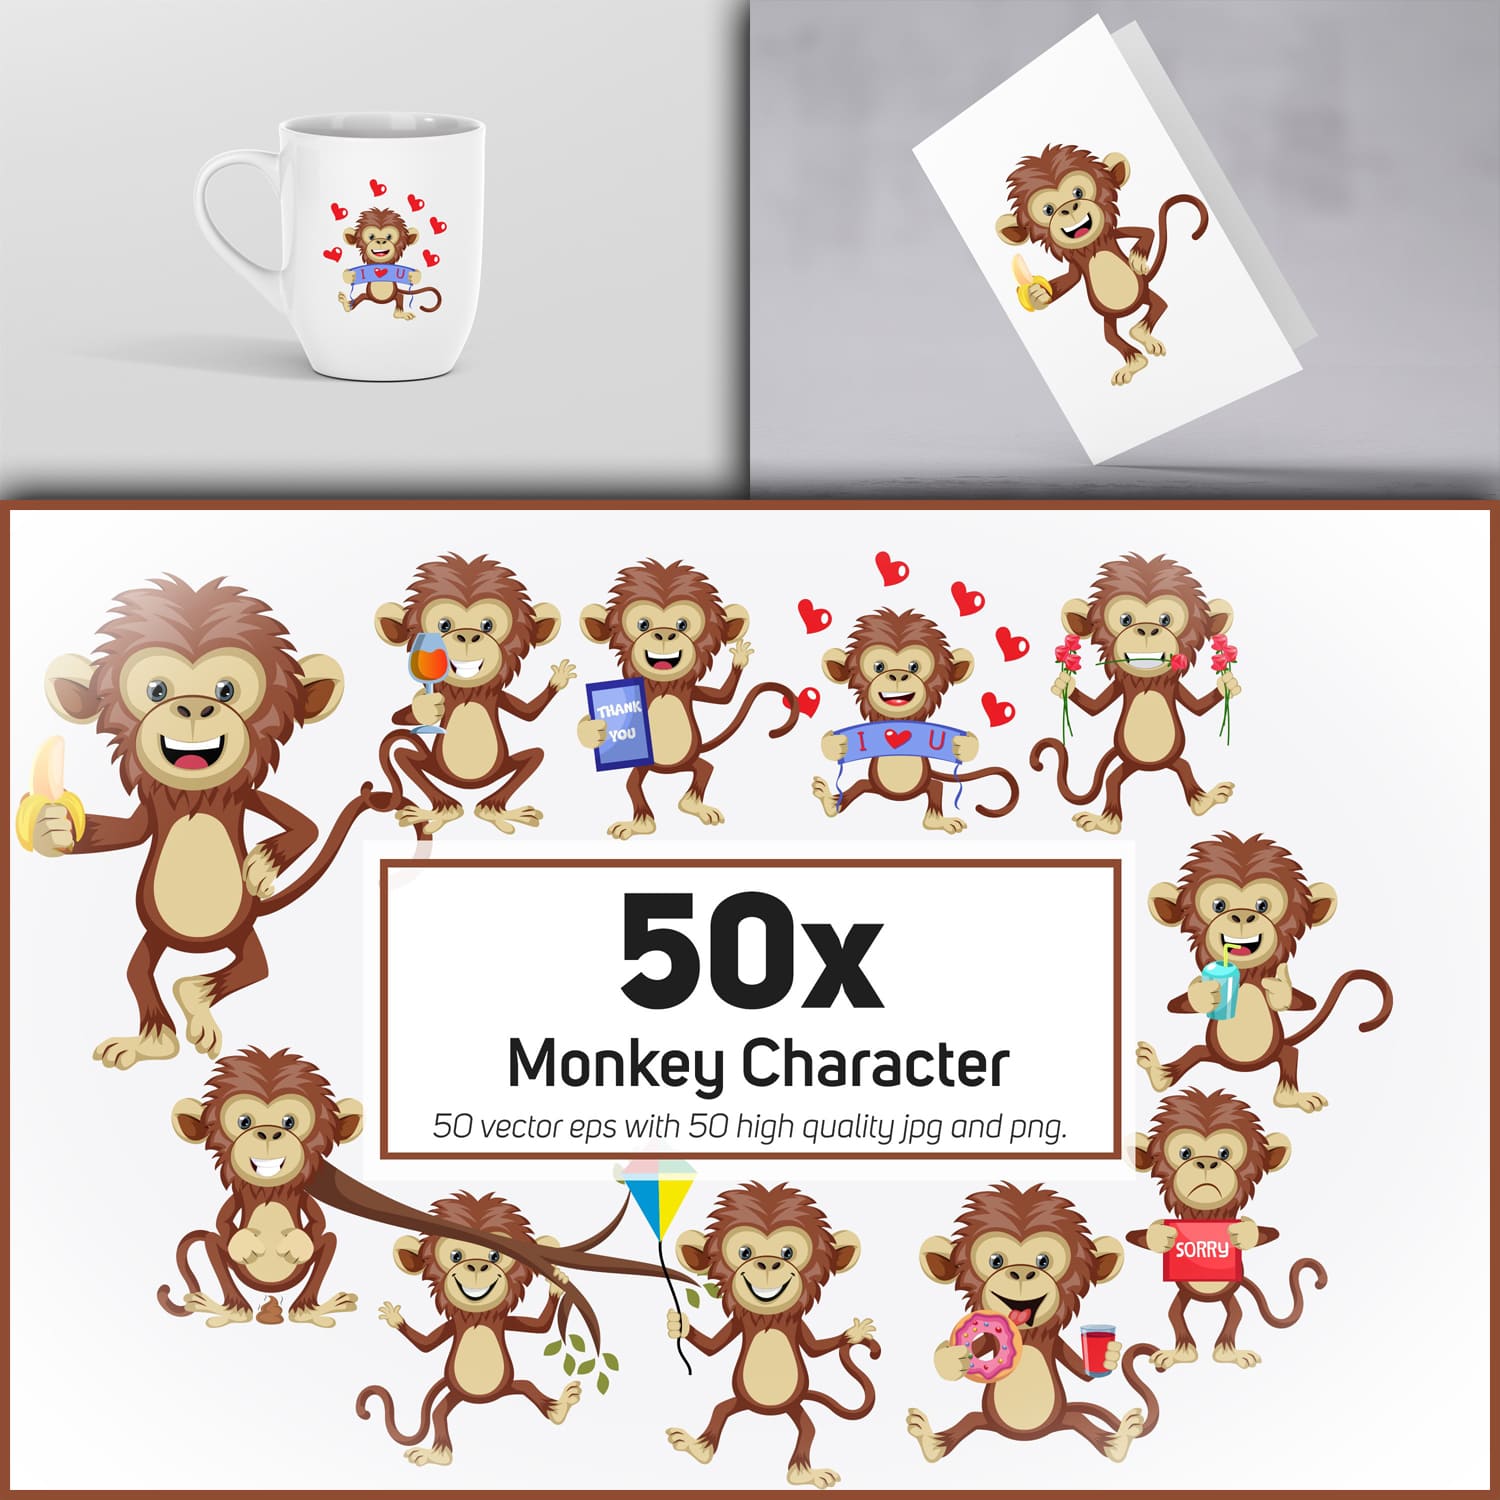 50x Monkey Character or Mascot collection illustration. cover.